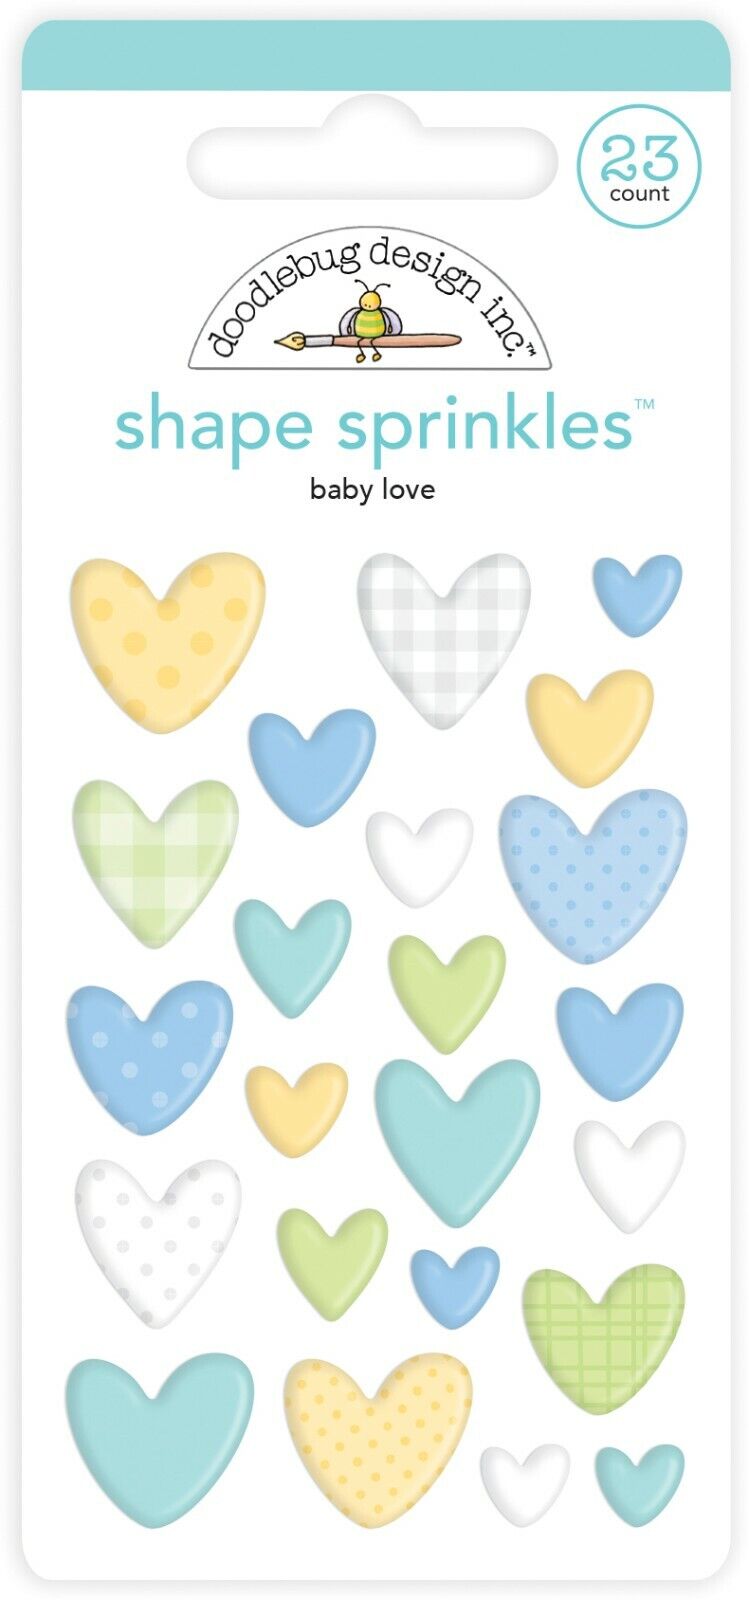 Crafts Doodlebug Sprinkles Puffy Baby Love Heart Shapes Patterns Plaid Dots Blue